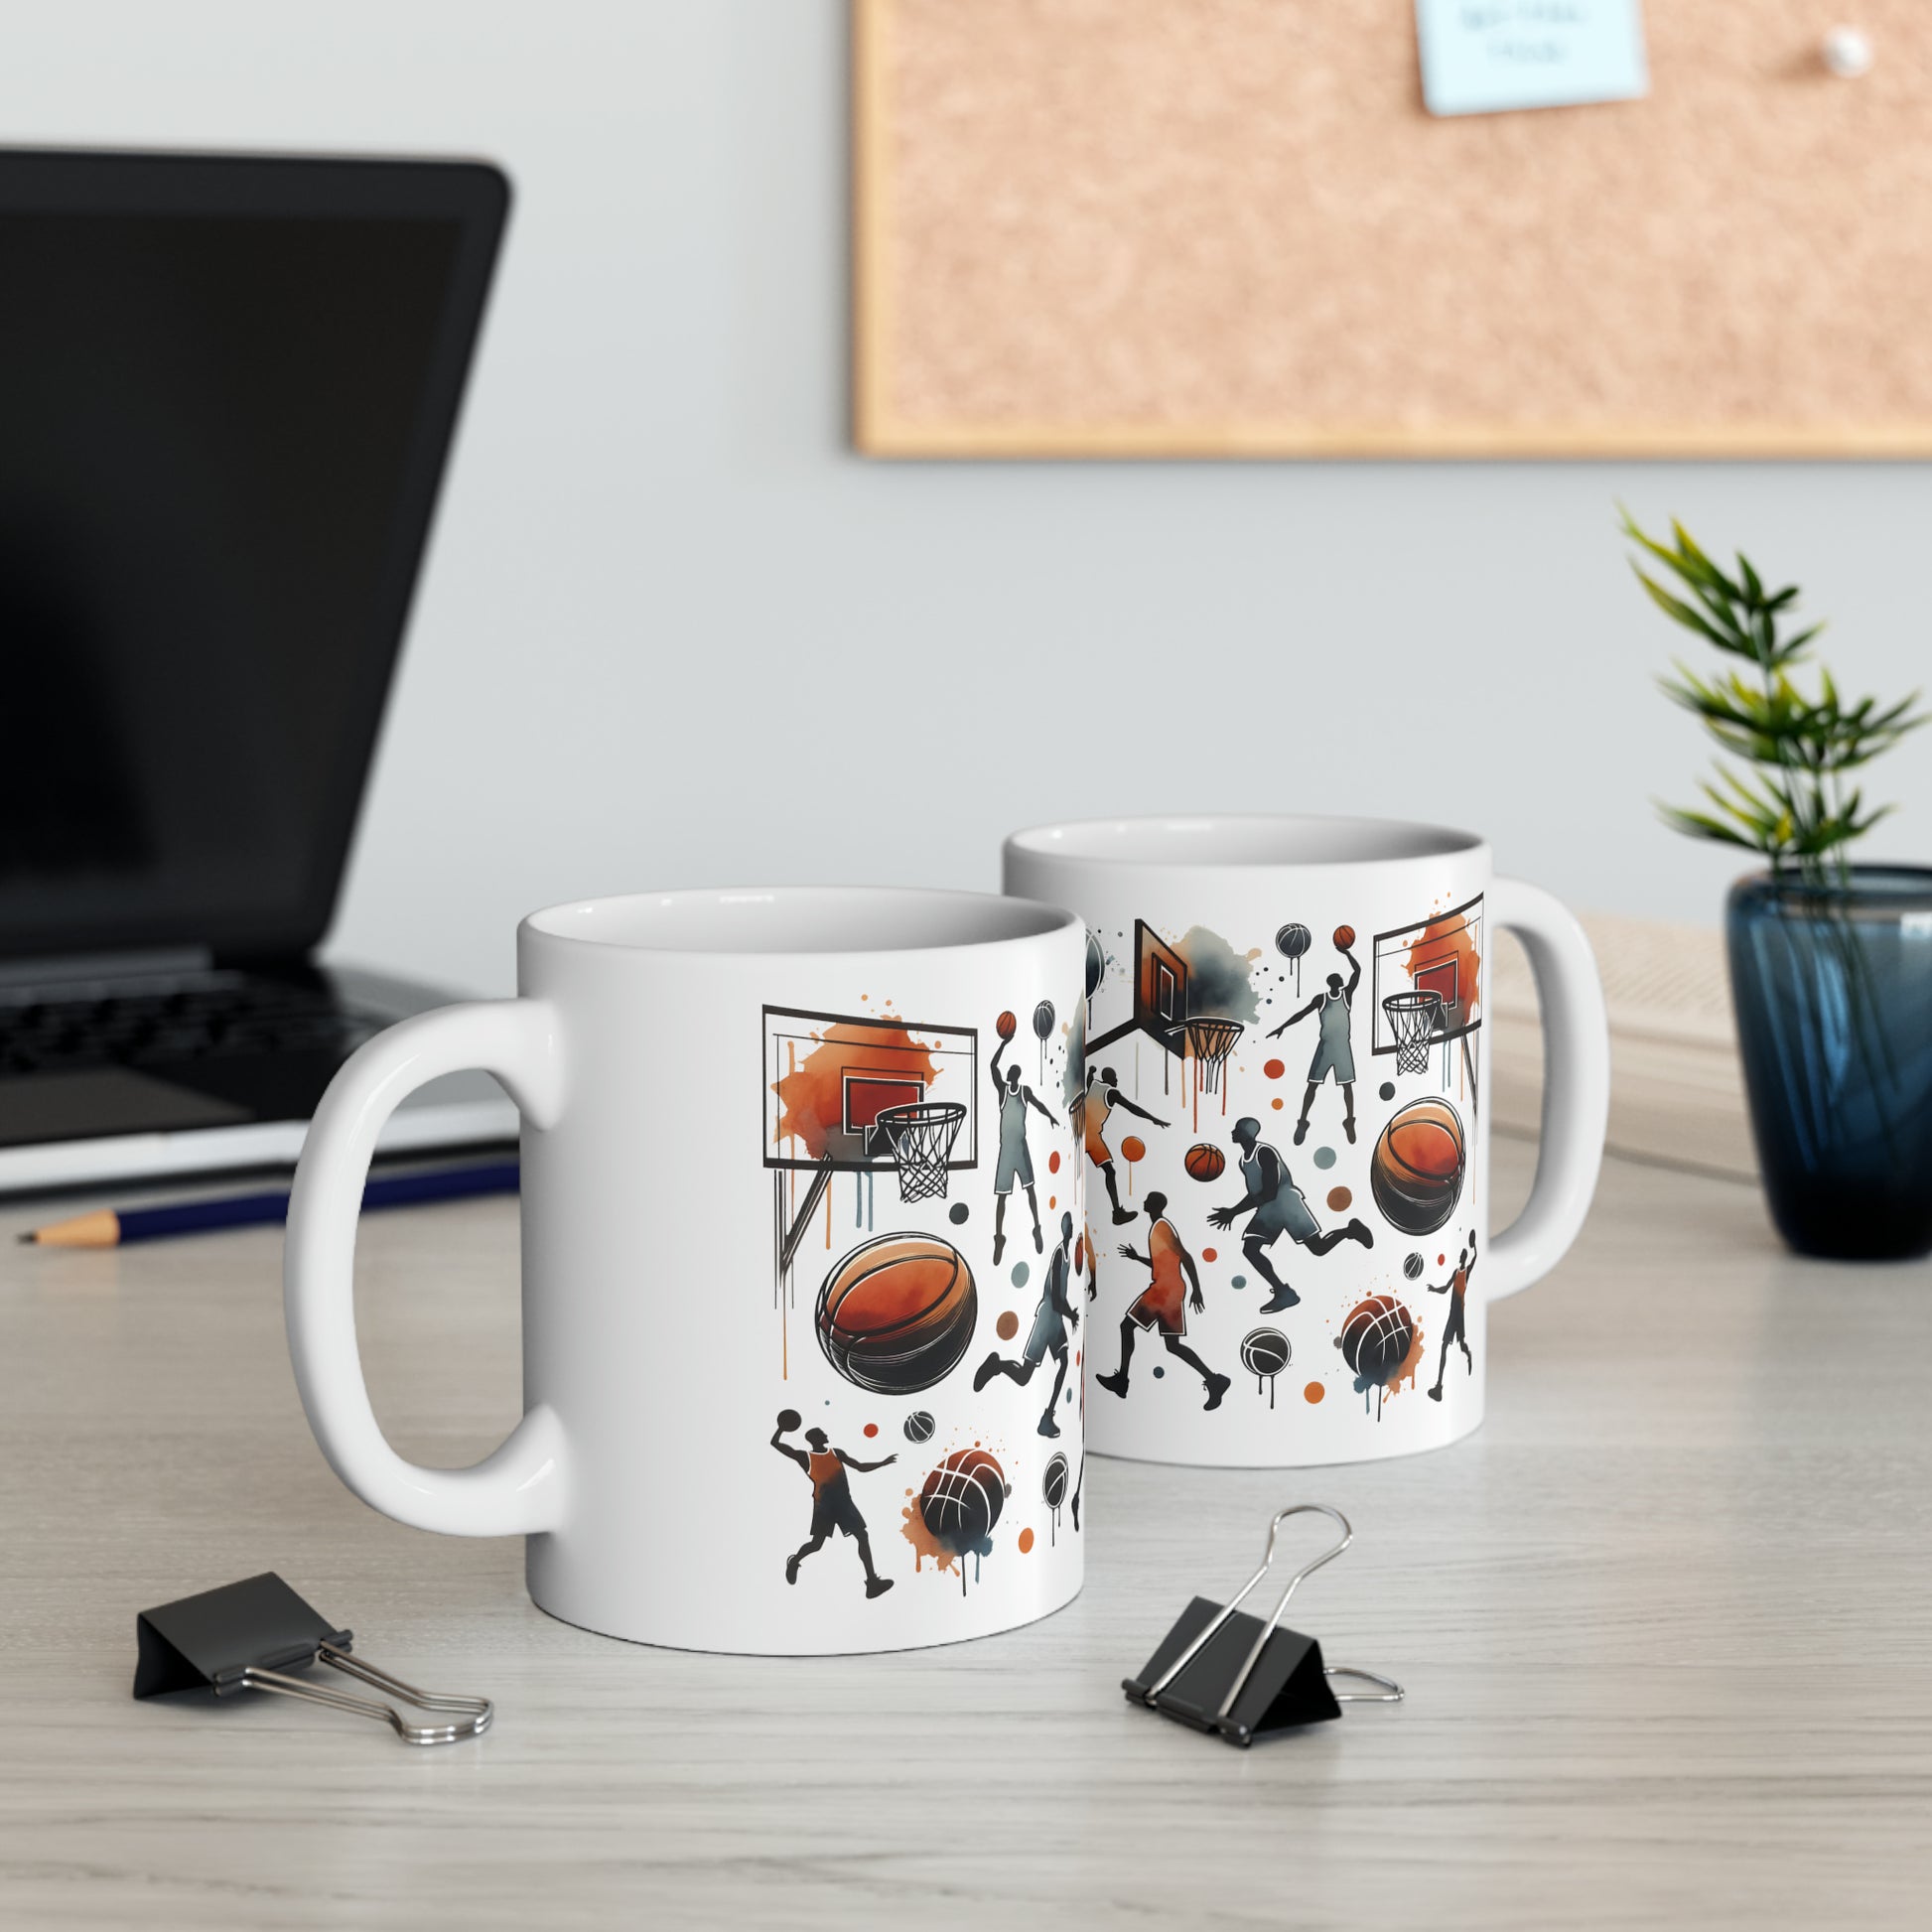 White ceramic mug (11oz) featuring vibrant basketball-themed artwork, perfect for sports enthusiasts. BPA and lead-free, microwave and dishwasher safe